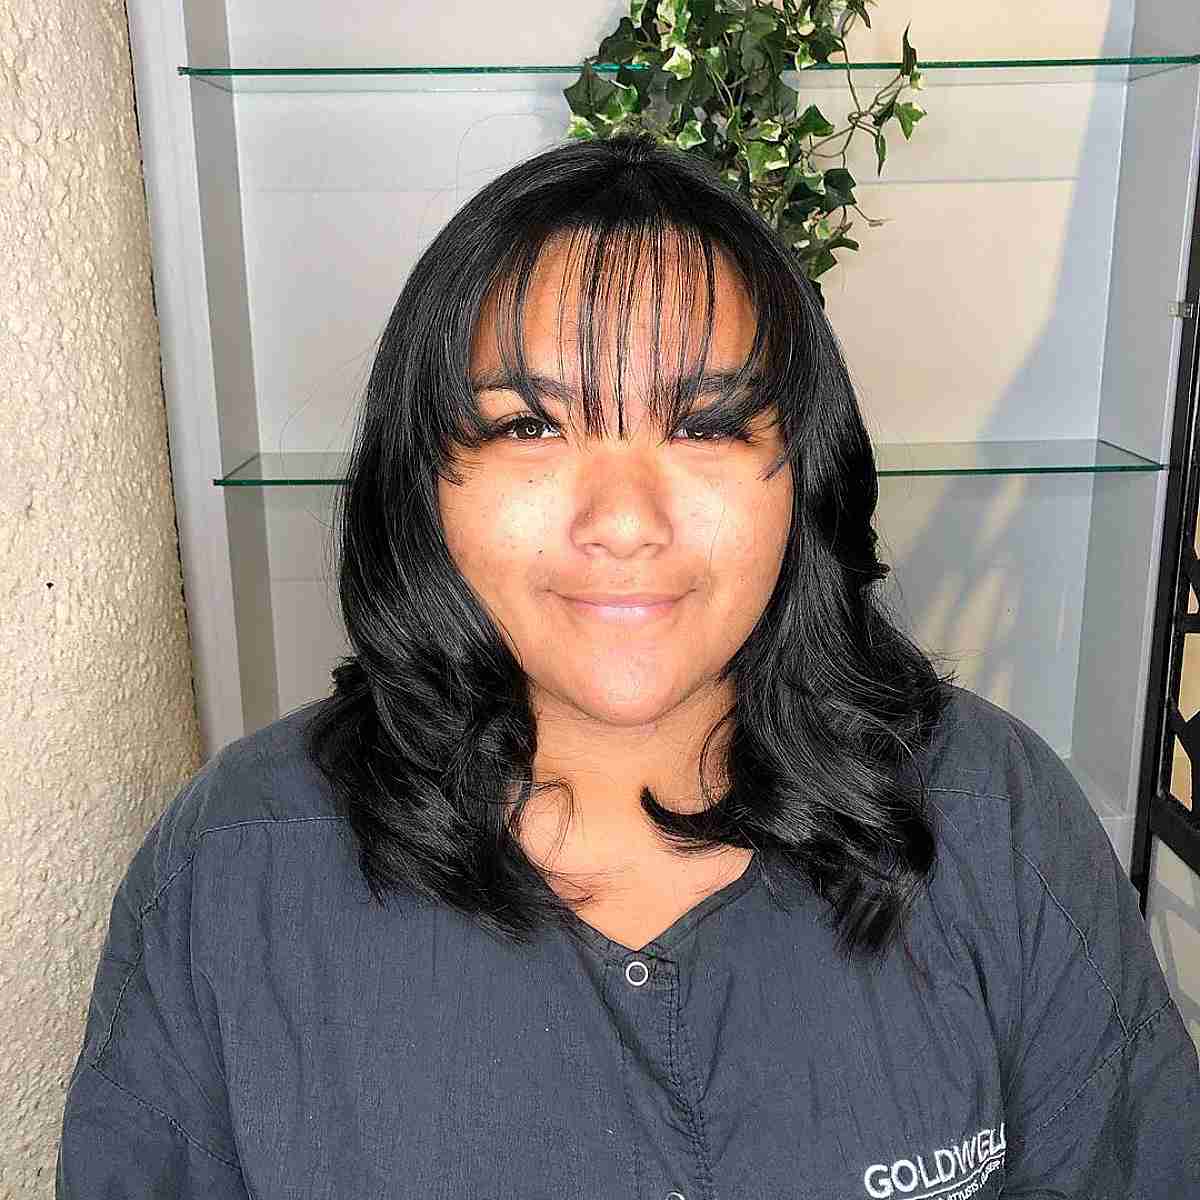 See-Through Long Arched Bangs on Wavy Mid-Length Hair